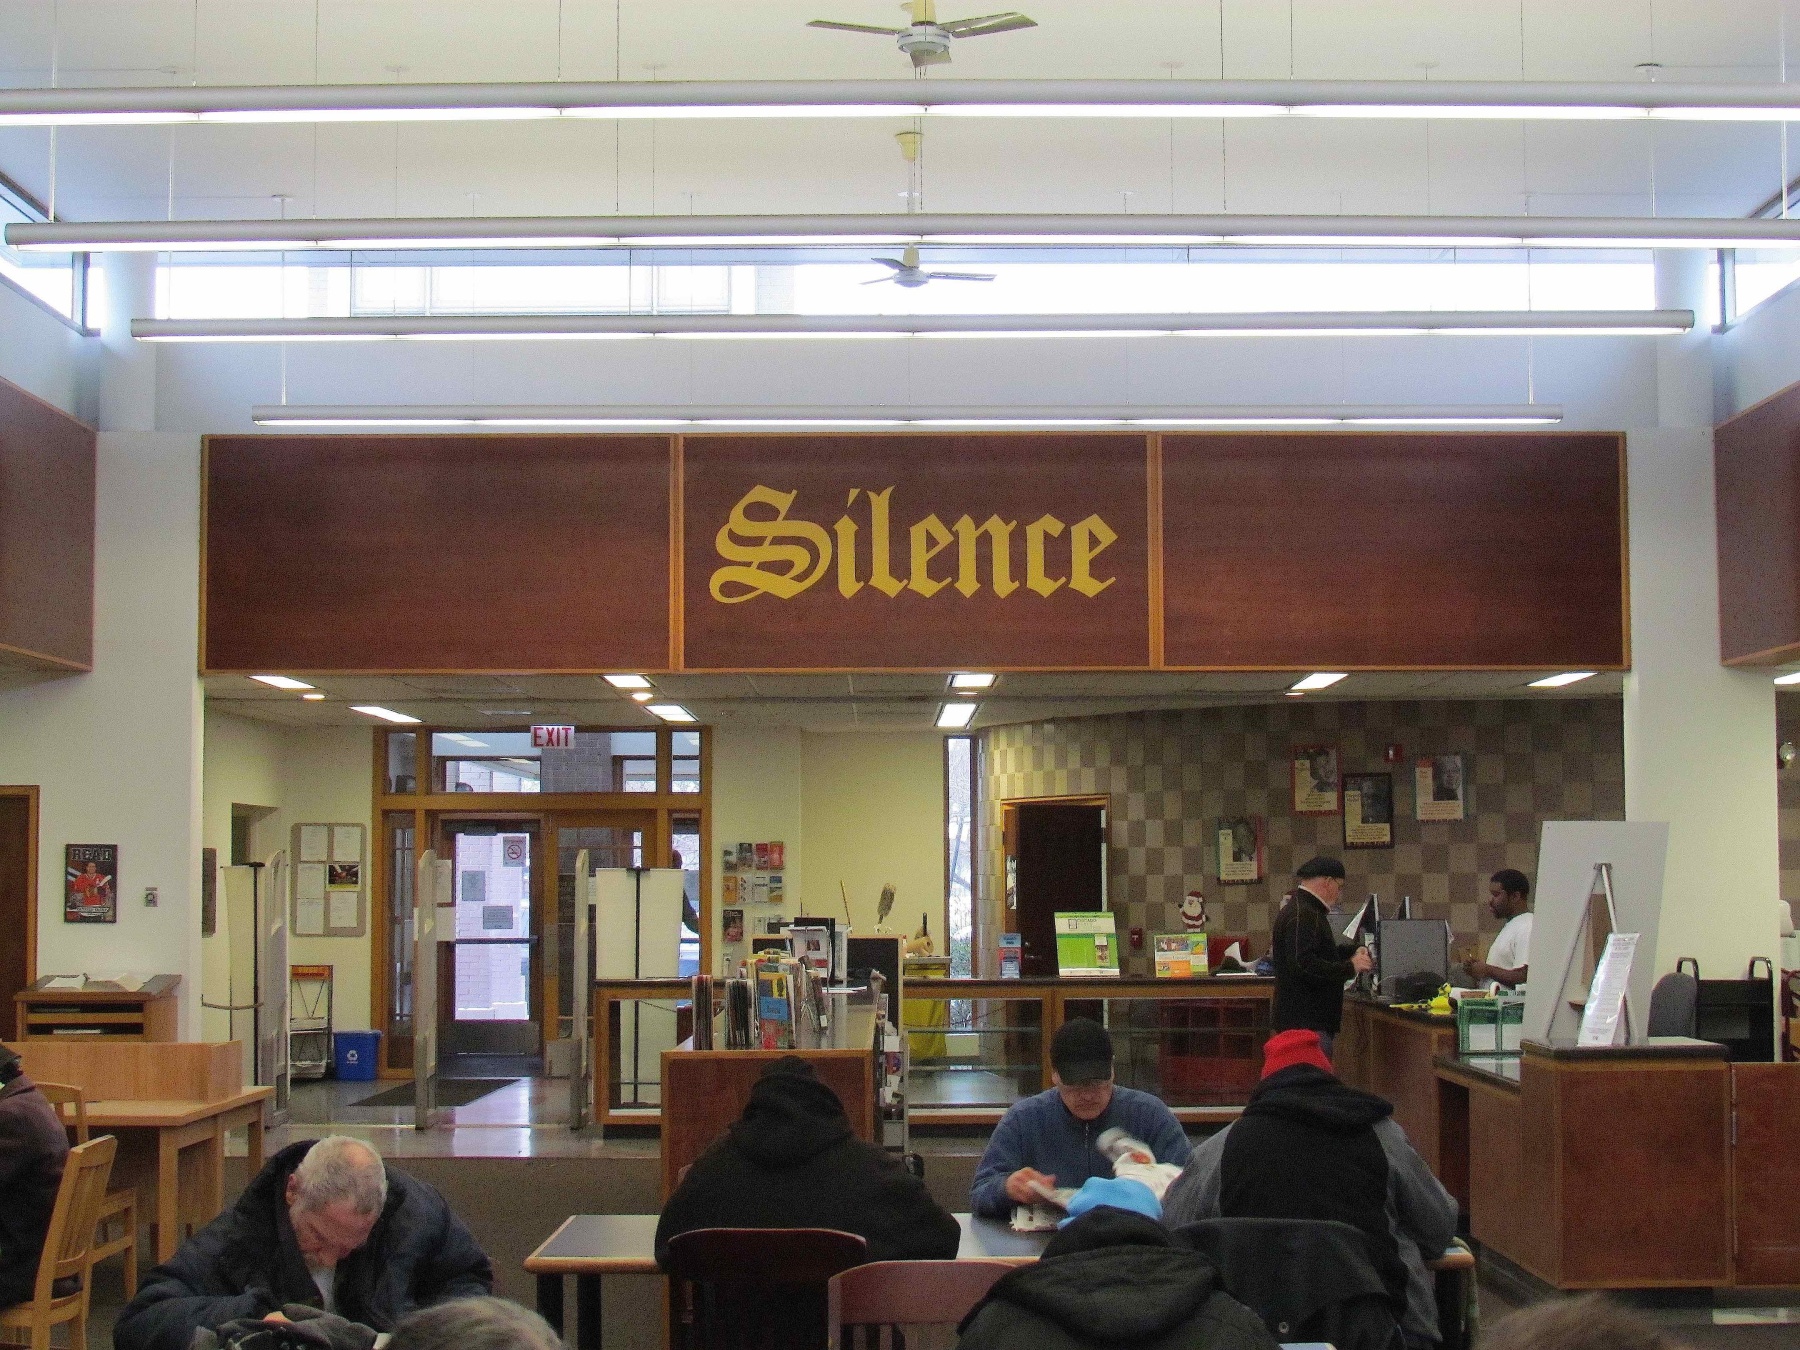 Silence License, 1995Permanent installationChicago Public Library, Mabel Manning Branch